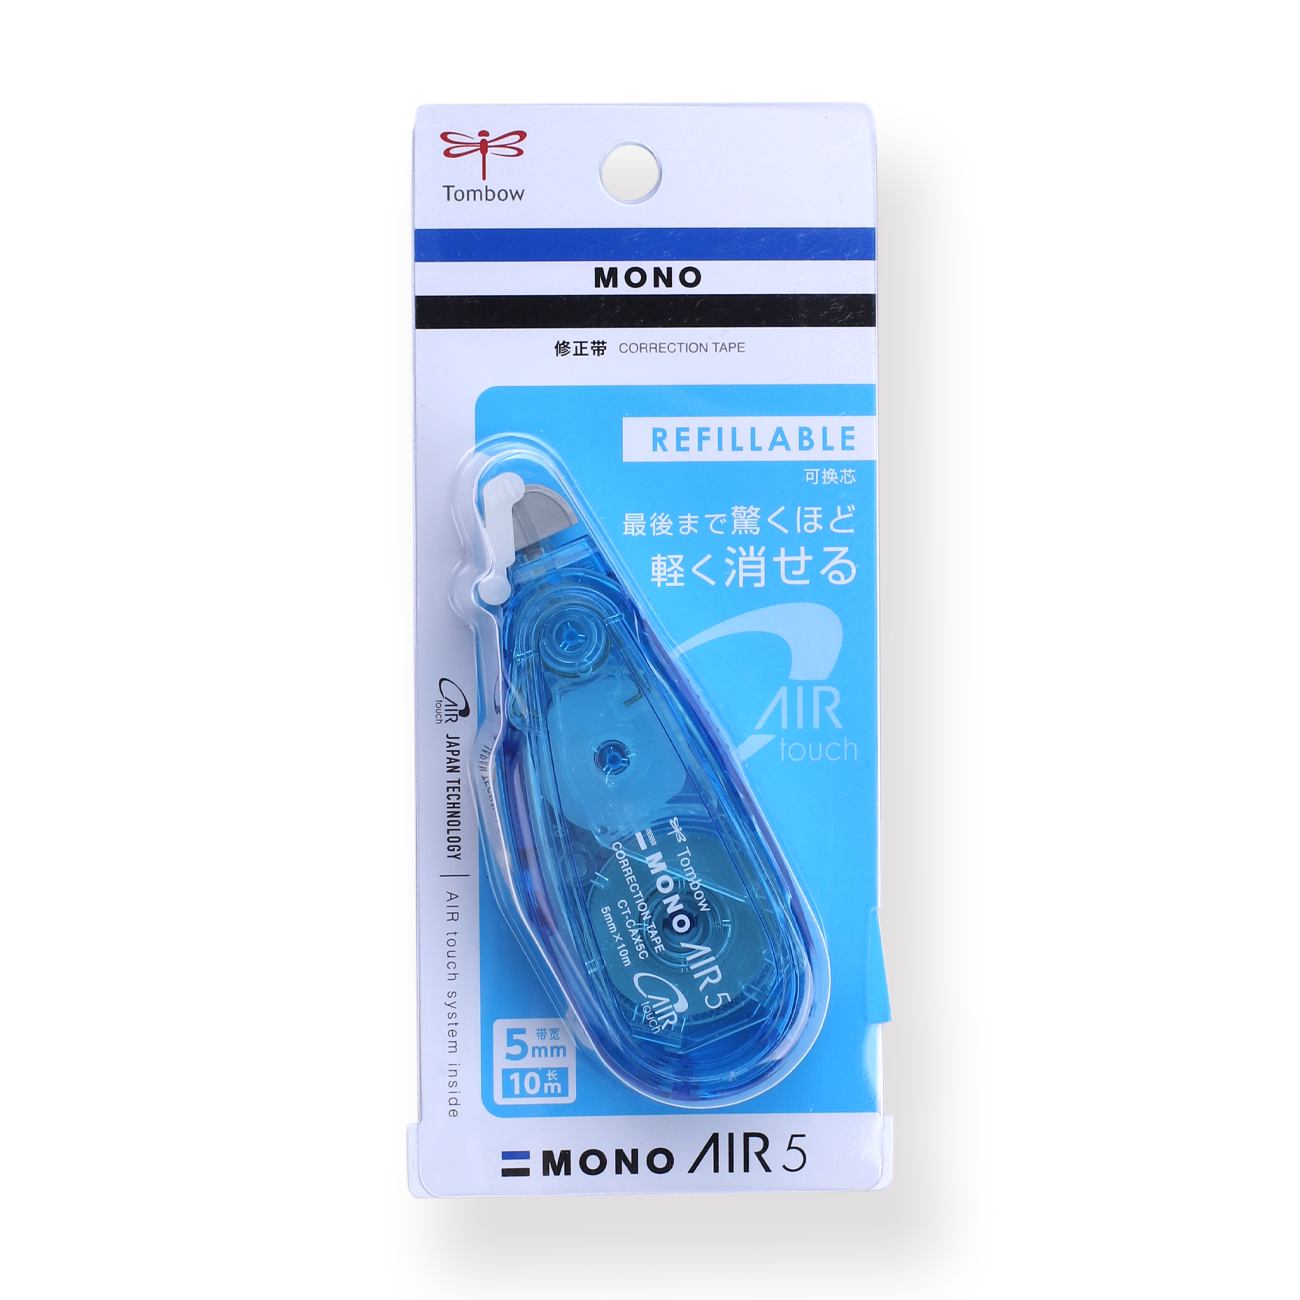 Tombow MONO Air 5 Correction Tape - Blue Body - Stationery Pal